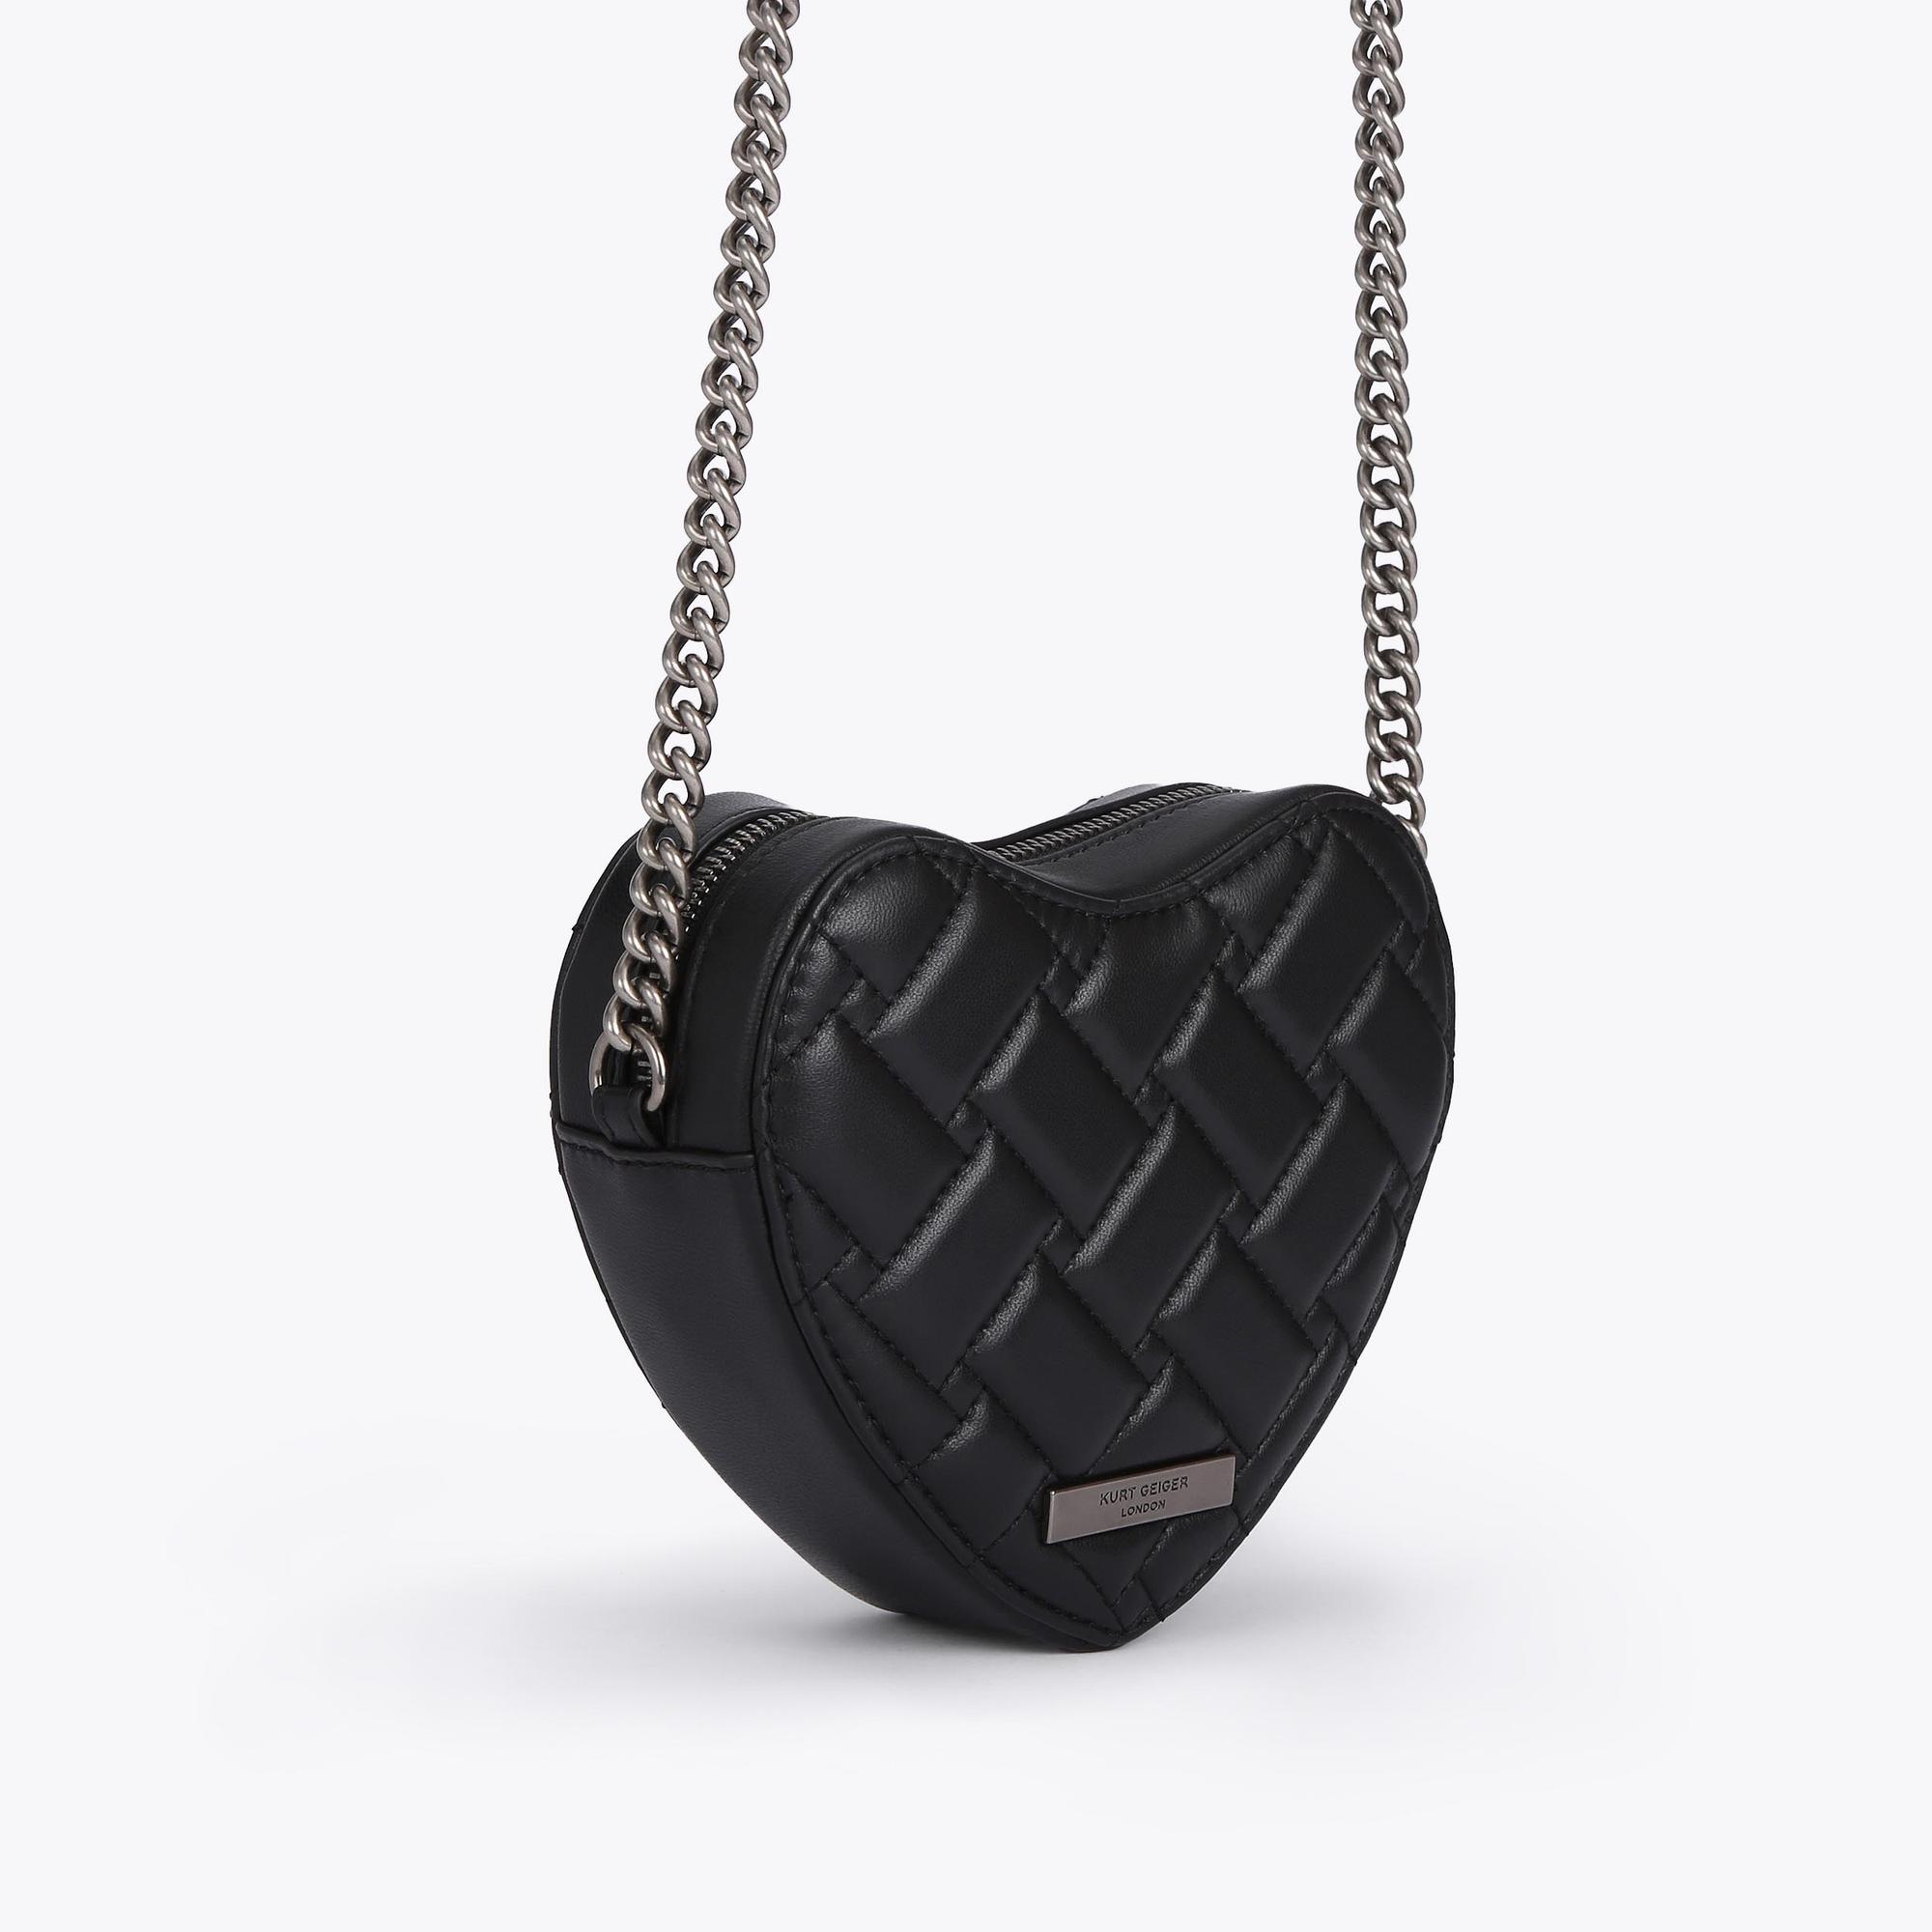 KENSINGTON HEART X BODY Black Heart Quilted Leather Cross Body by